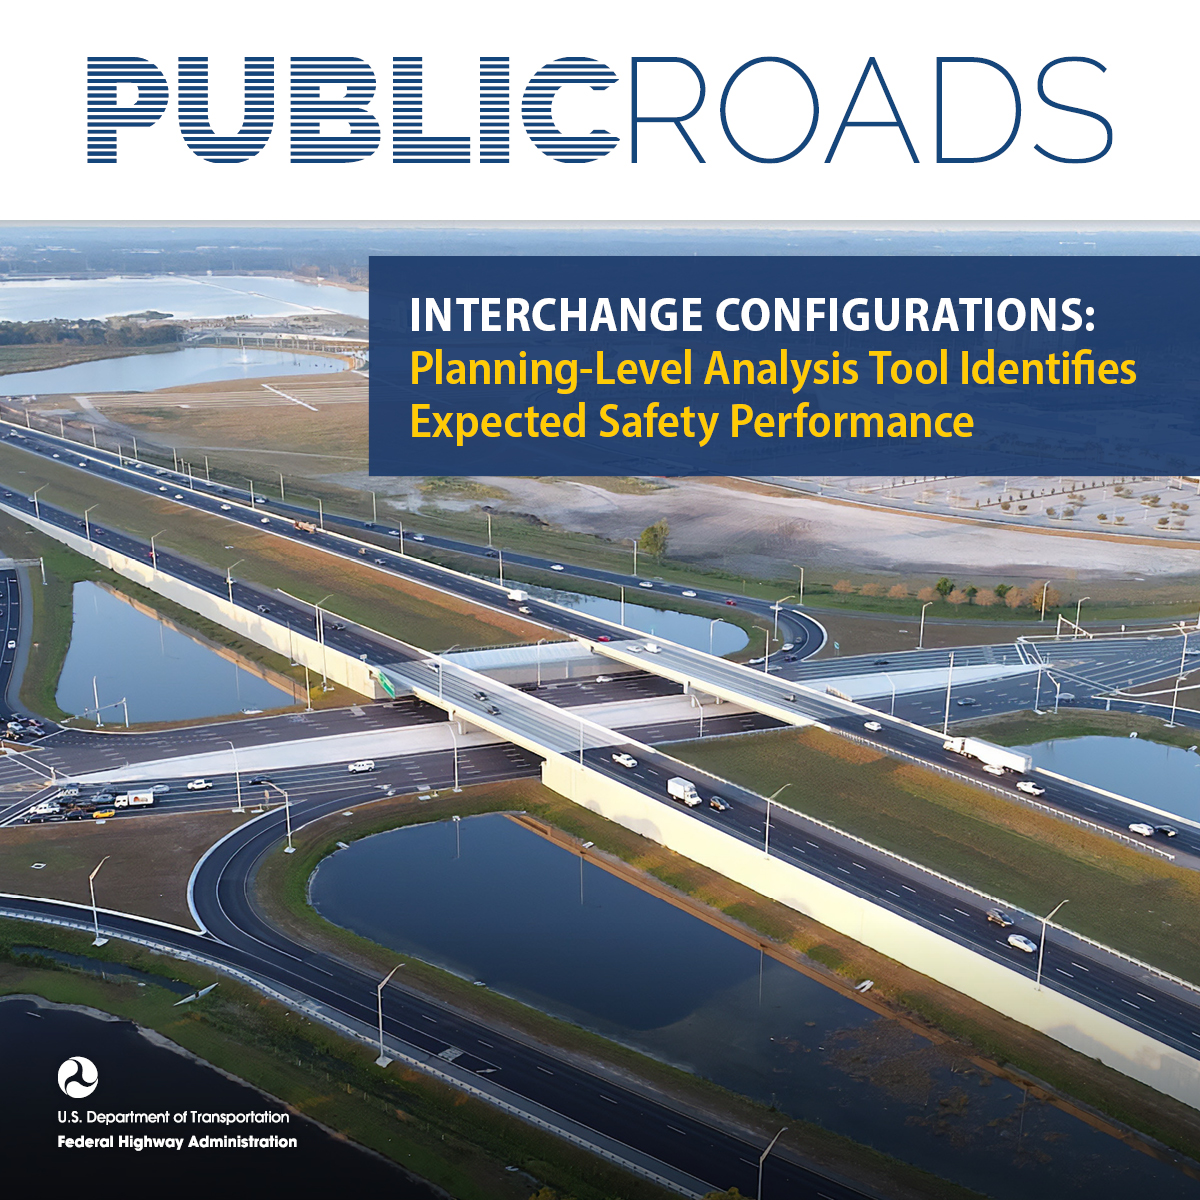 In 2009, FHWA began collaborating with @NASEMTRB to develop the Enhanced Interchange Safety Analysis Tool, an improved prediction methodology and safety analysis tool for corridor and site-specific analysis. #PublicRoads bit.ly/4bbwz6P